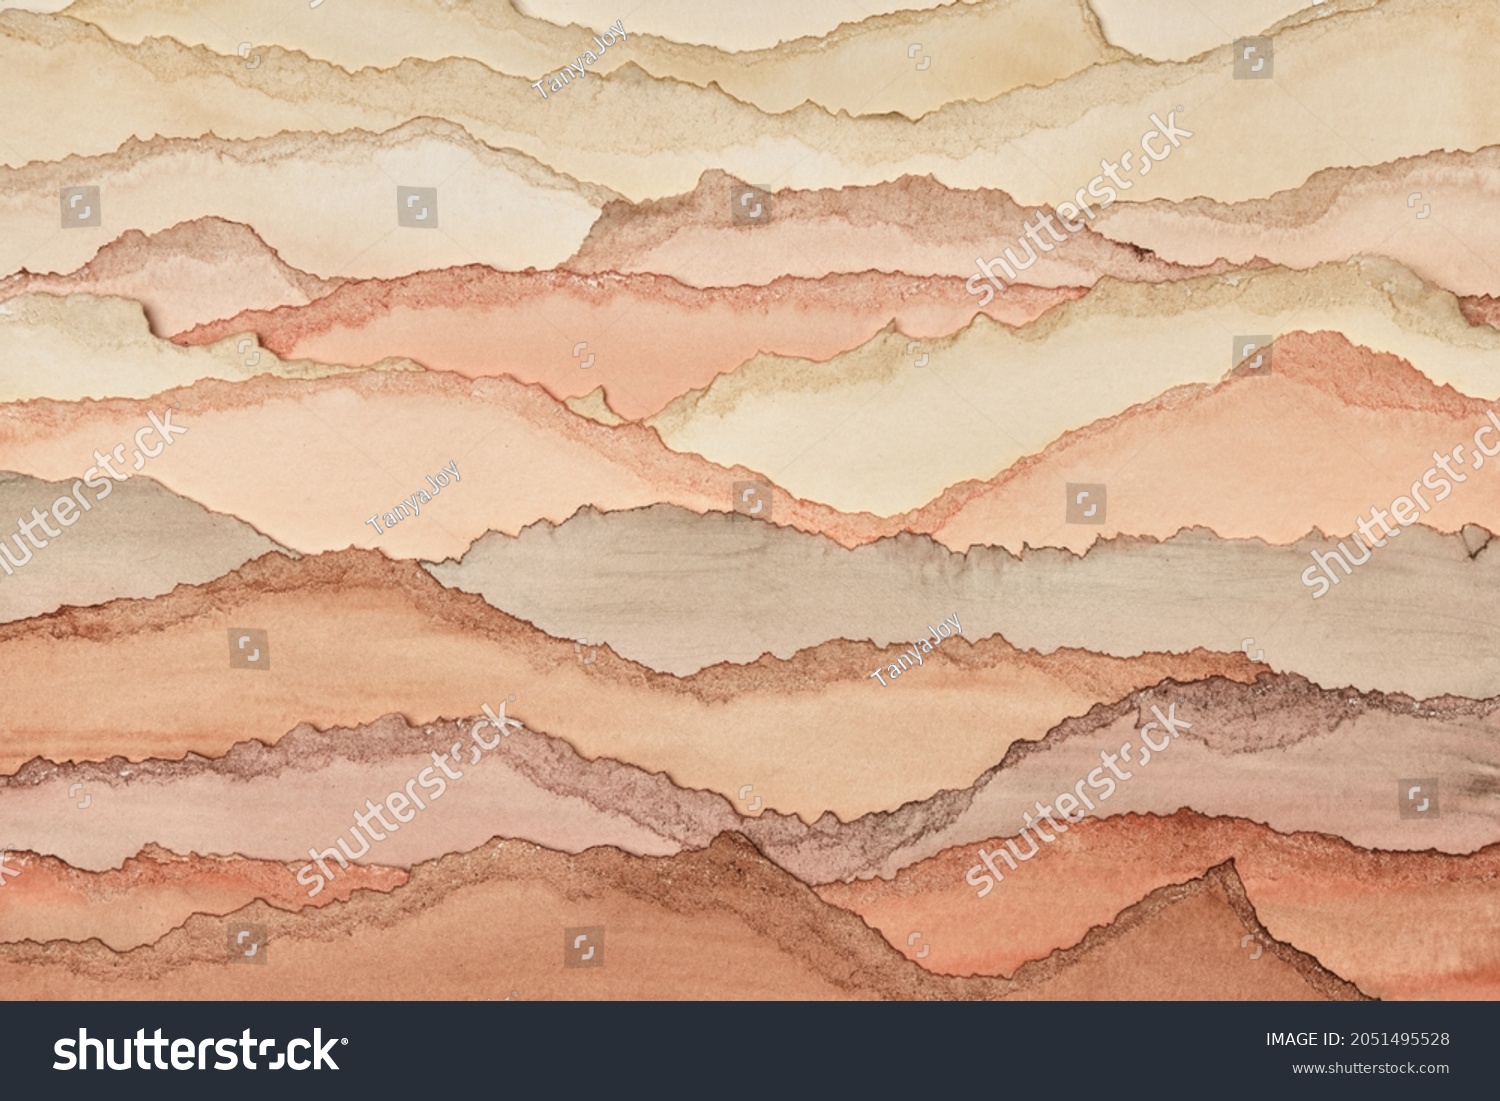 Desert landscape. Abstract texture background. Layers of watercolor painted paper. Torn edges. #2051495528